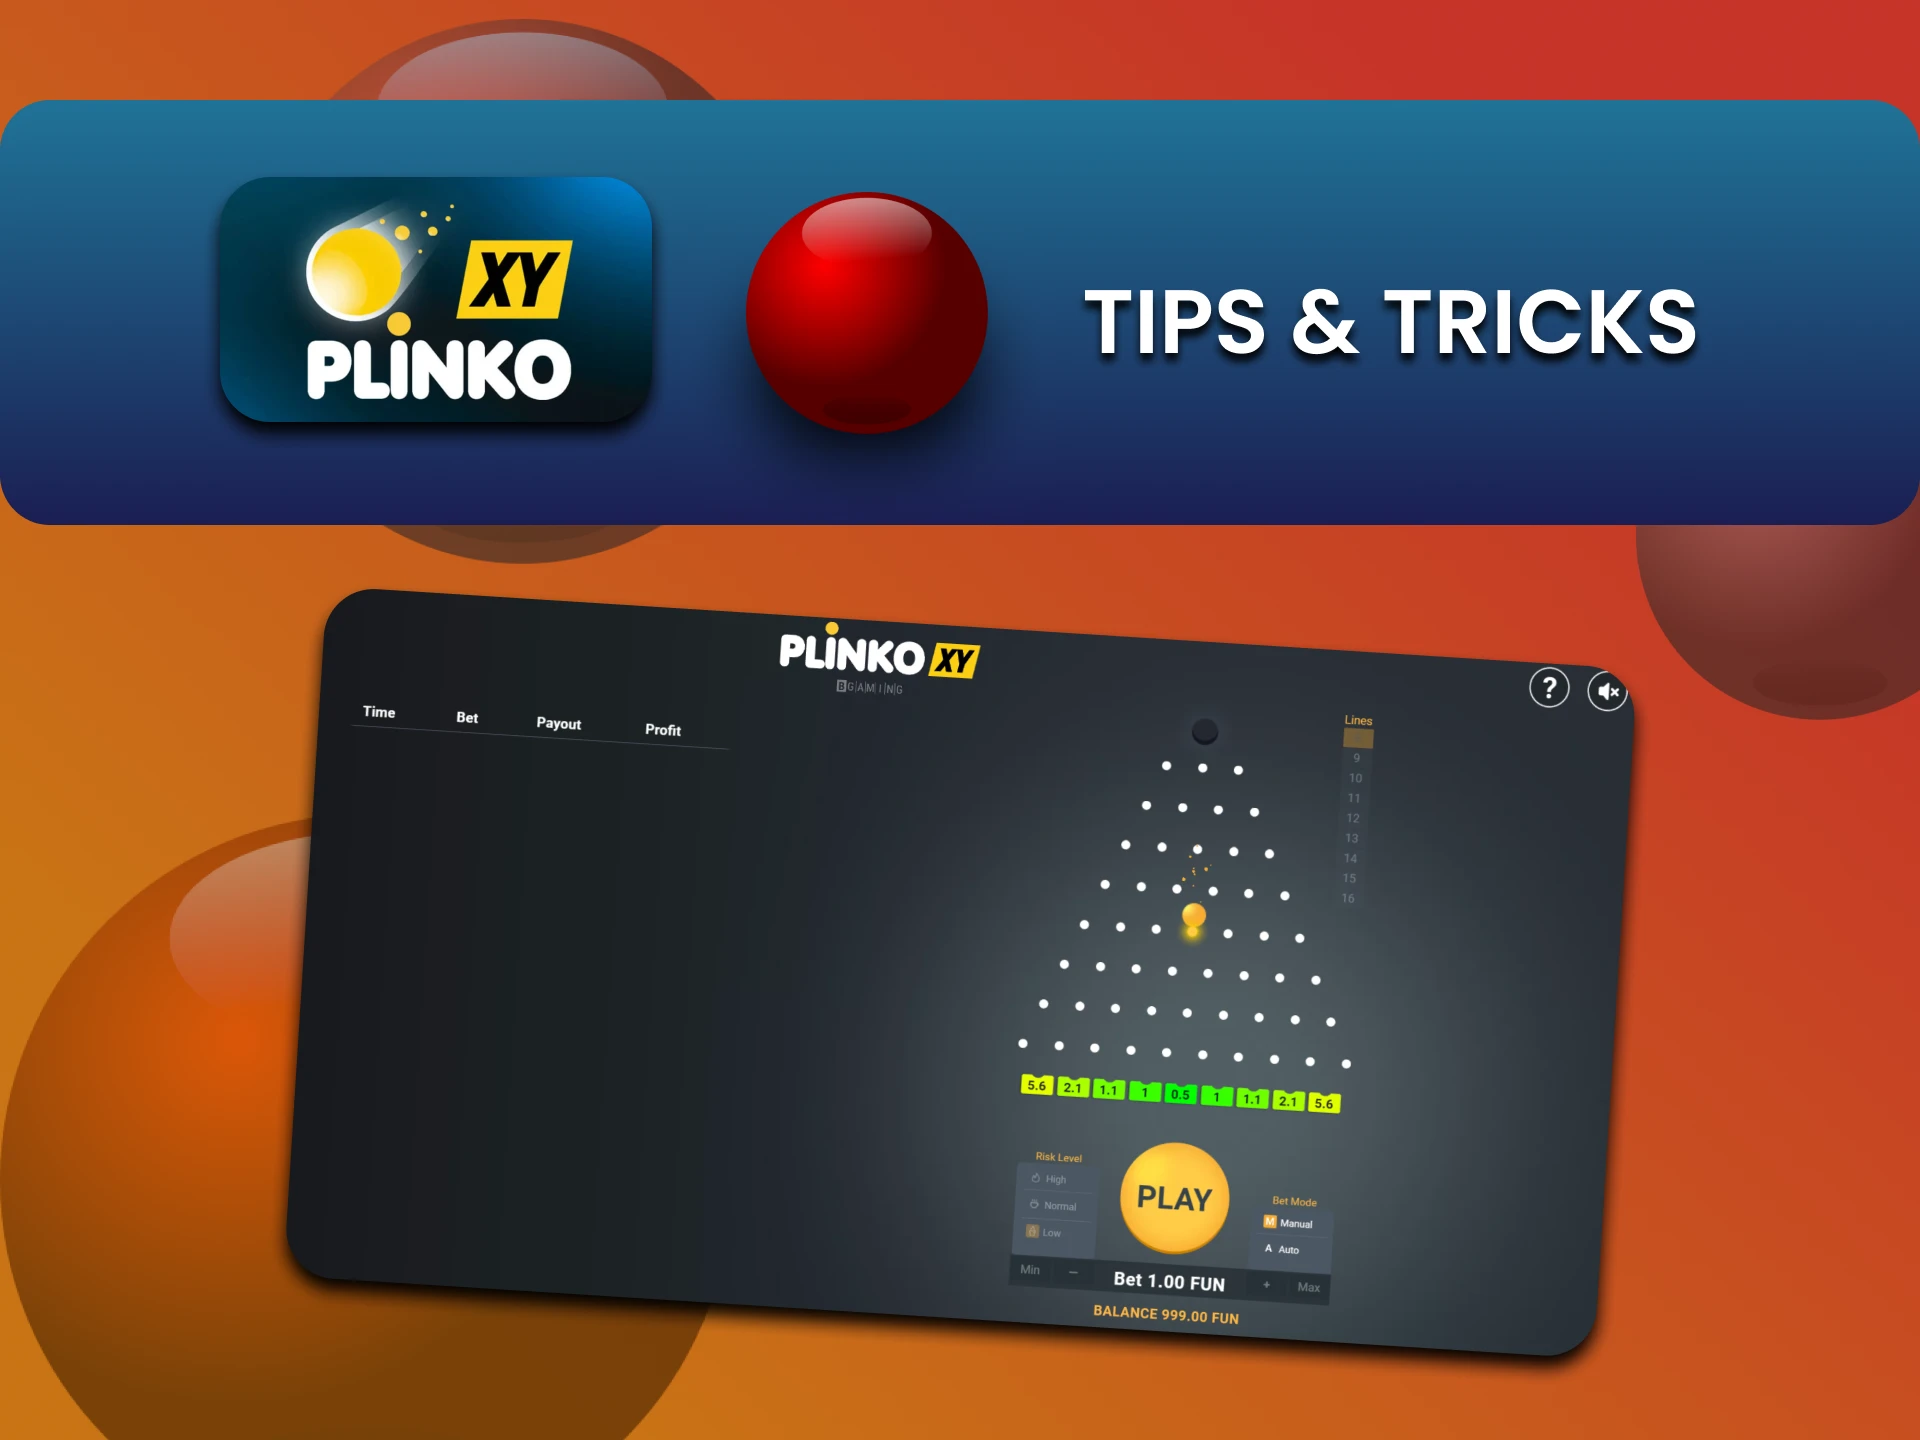 Learn tips and tricks from other players to win Plinko XY.